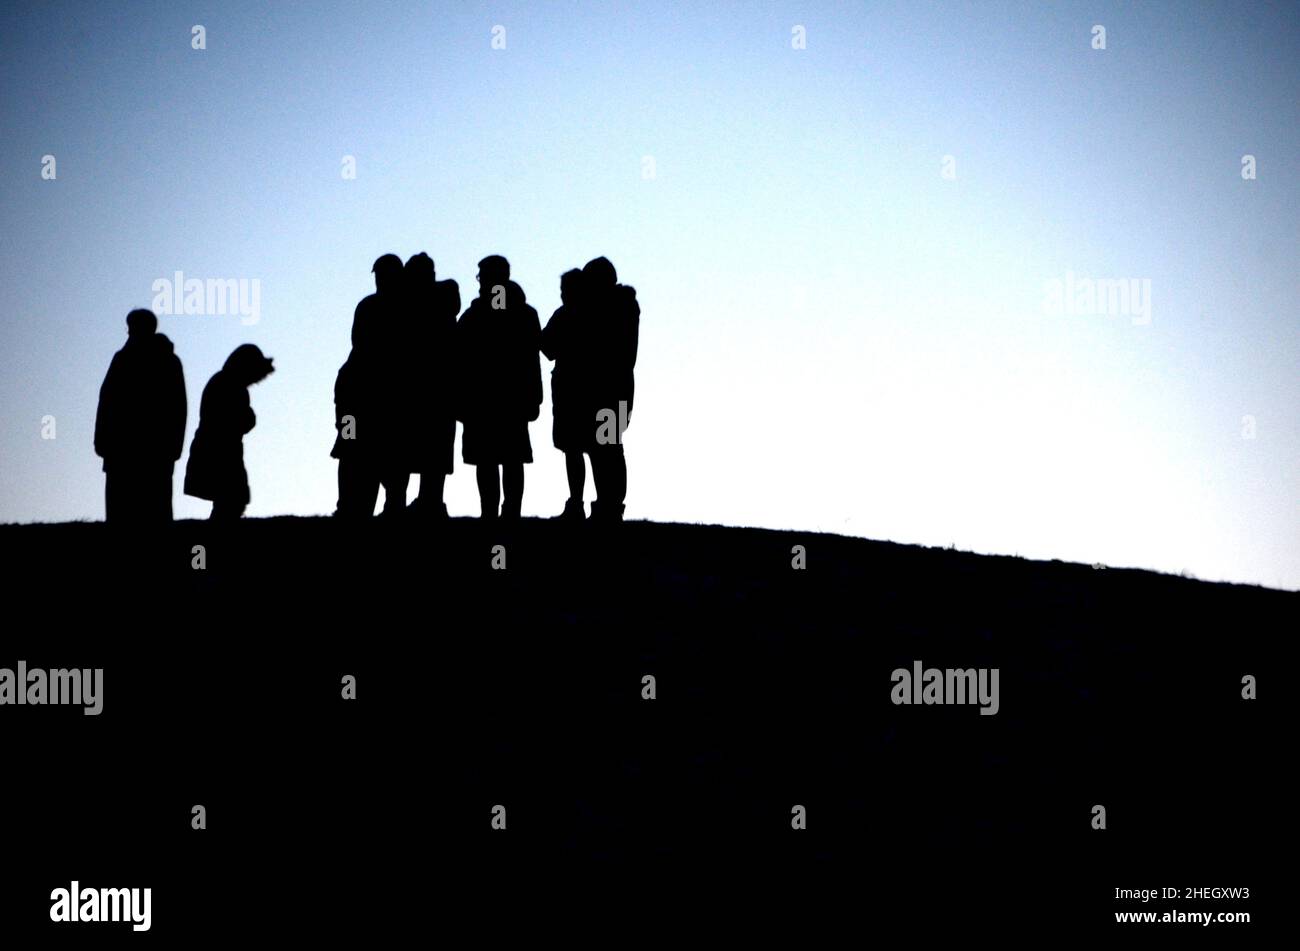 Silhouettes of people standing in a group at the top of a hill Stock Photo